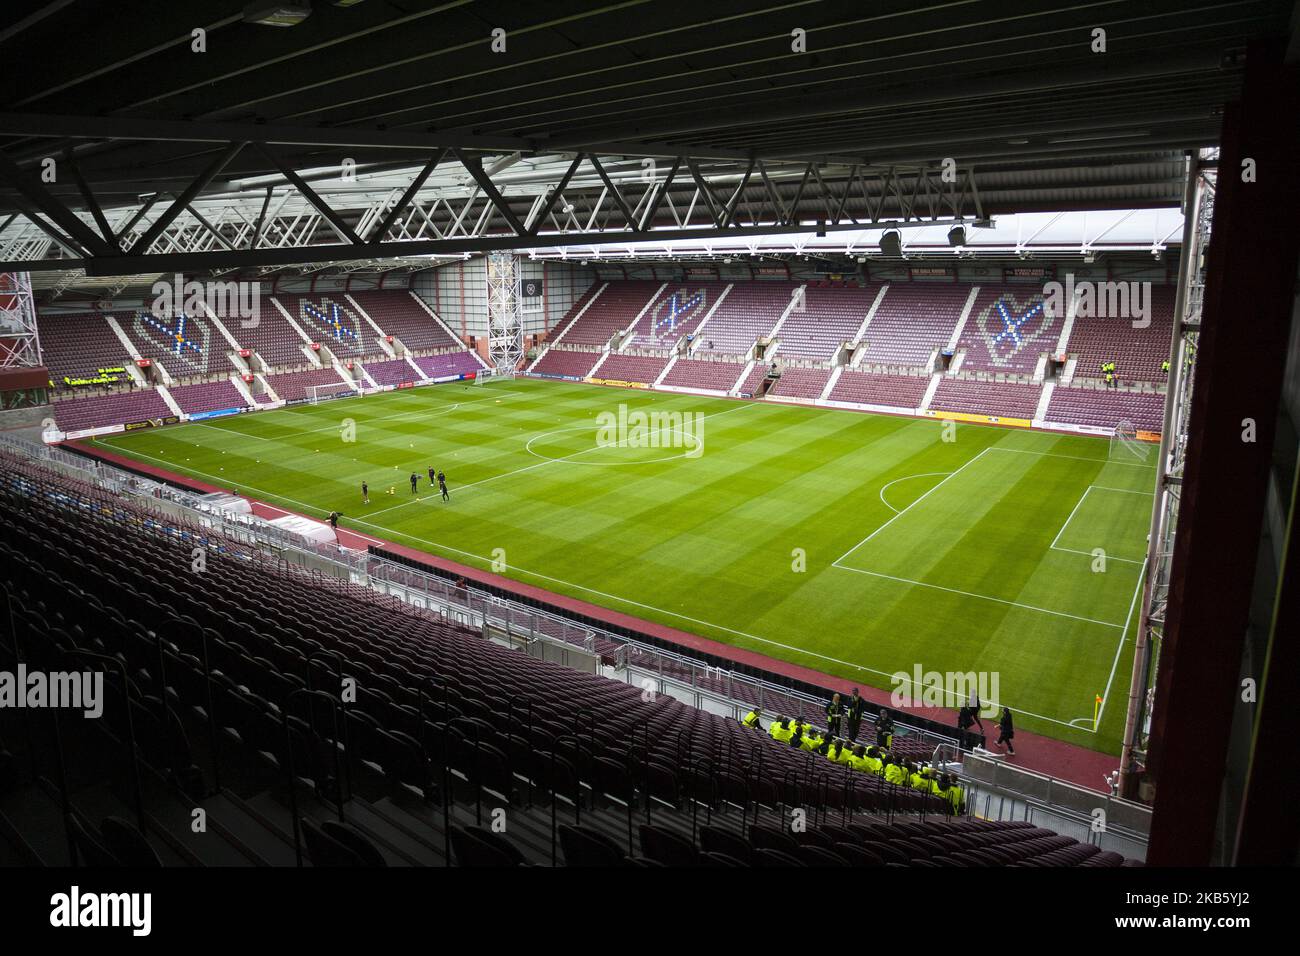 A general view of Tynecastle park ahead of the Scottish Premier League match between Hearts and Motherwell at Tynecastle park on 14 September, 2019 in Edinburgh, Scotland. (Photo by Ewan Bootman/NurPhoto) Stock Photo